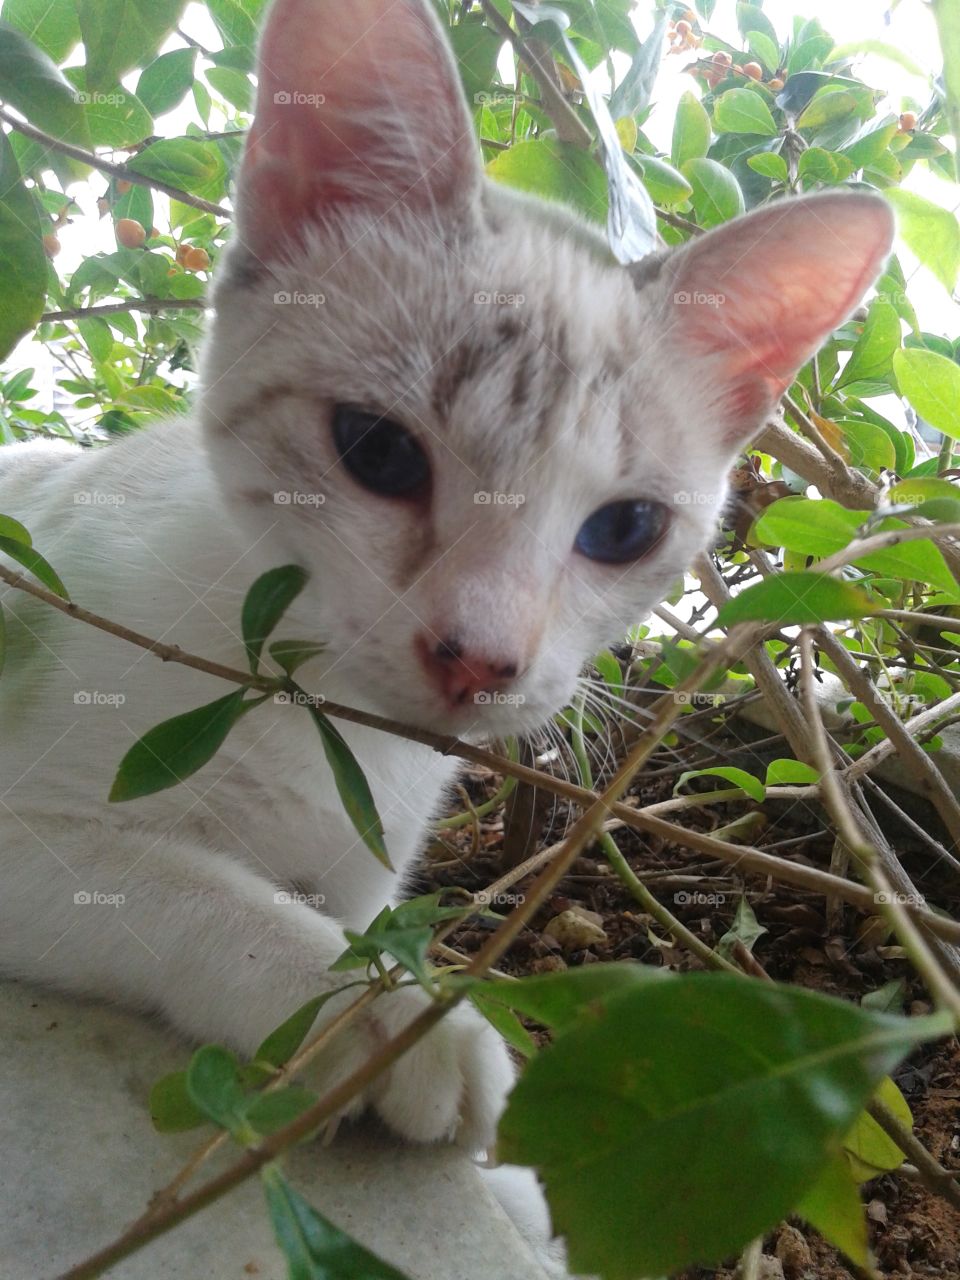 Cat in the bushes. my cat relaxing